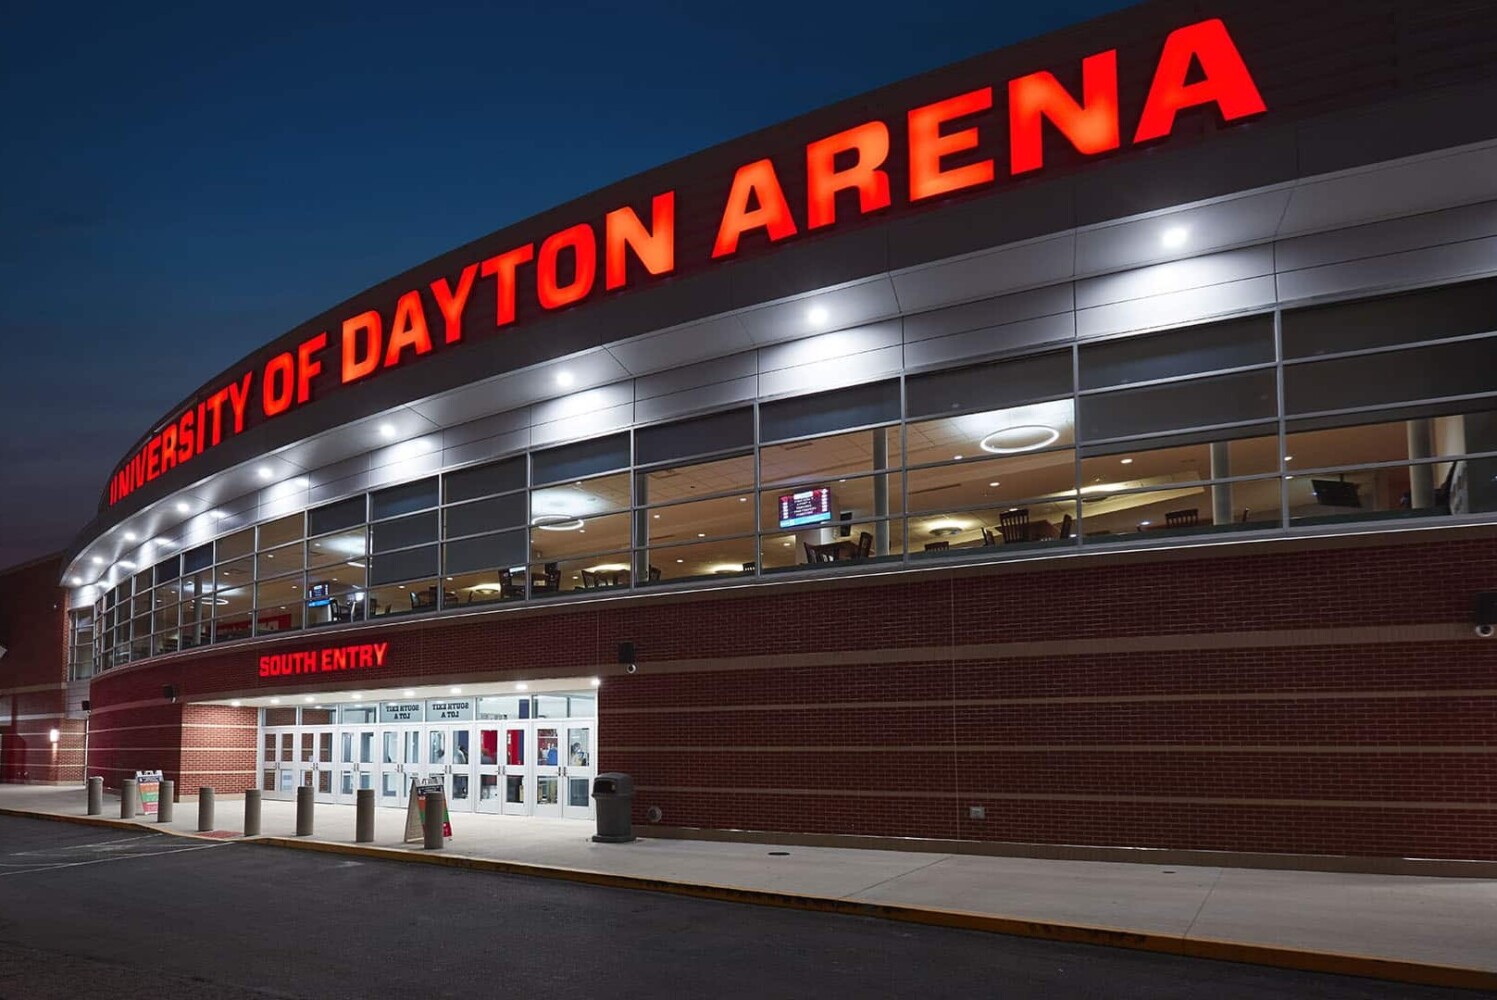 A view of the outside of University of Dayton Arena at night.